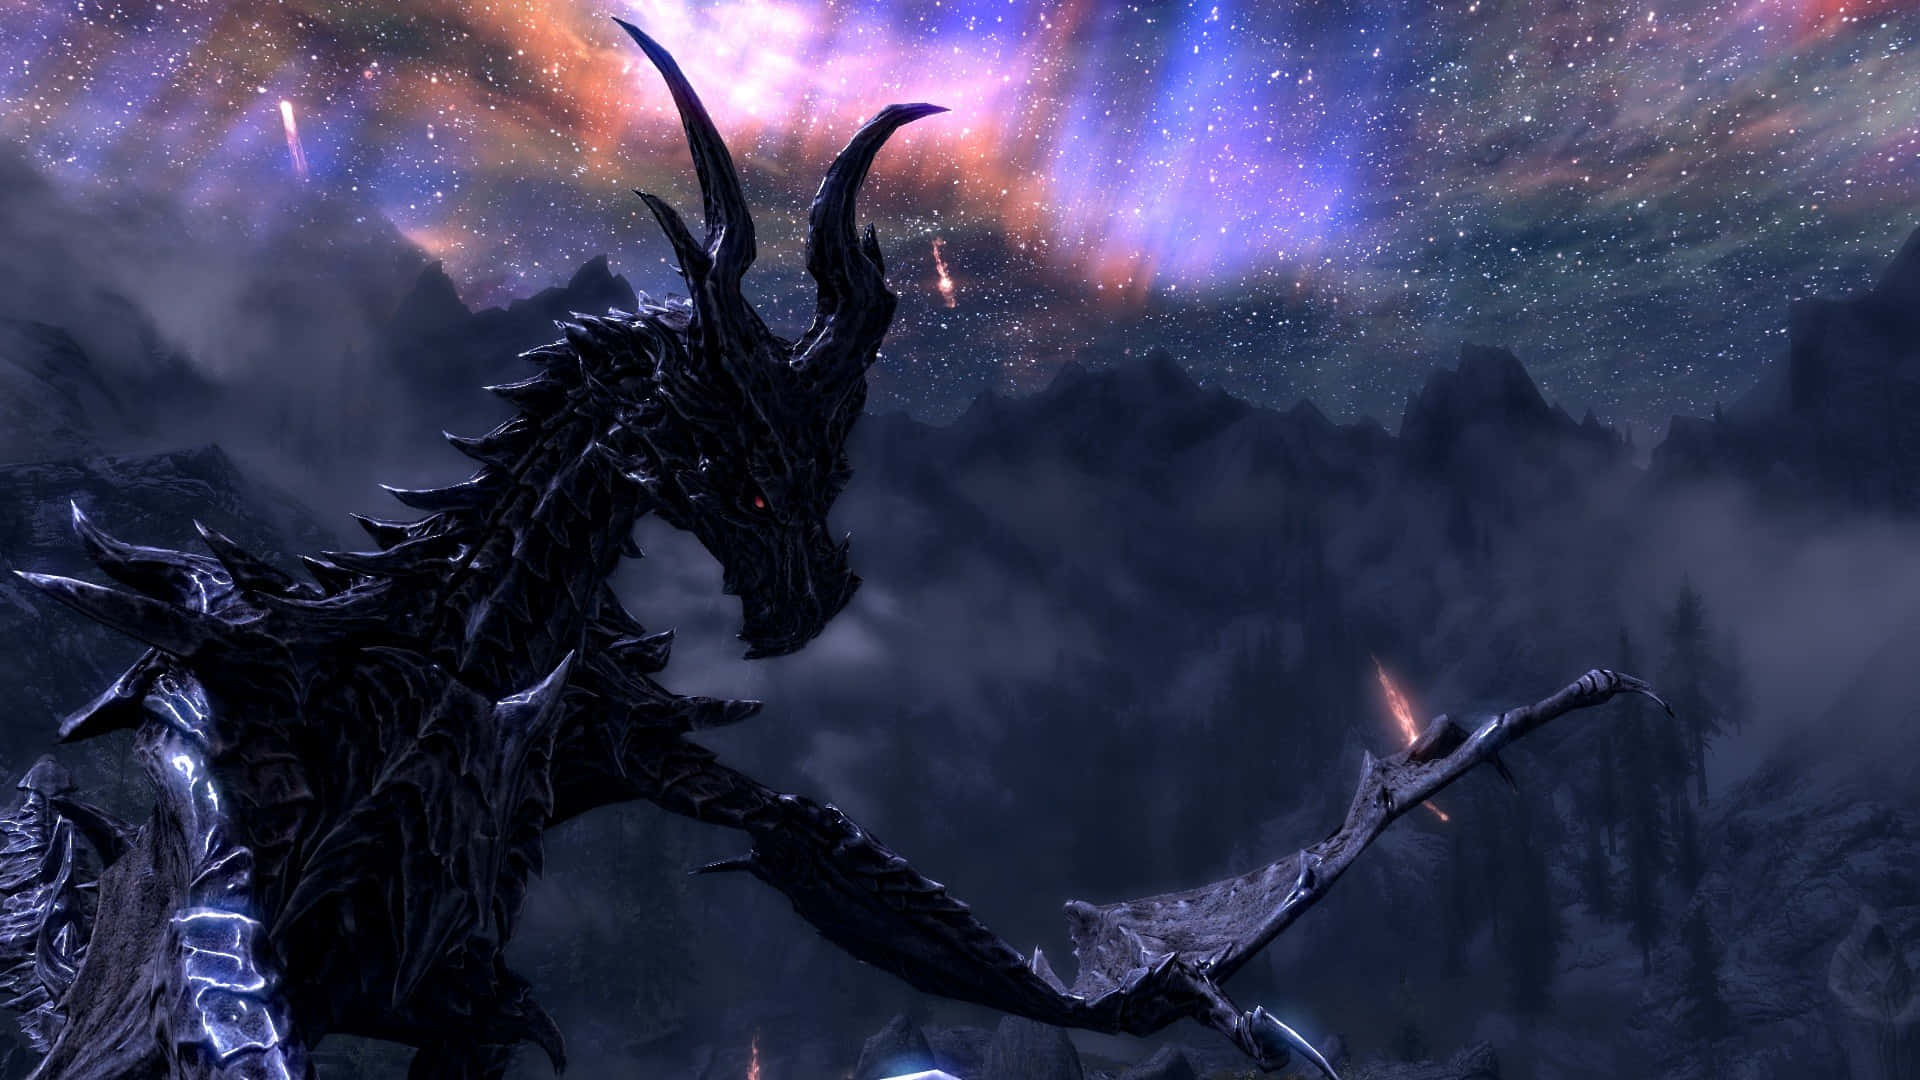 Caption: Paarthurnax, the Wise Dragon of Skyrim Wallpaper